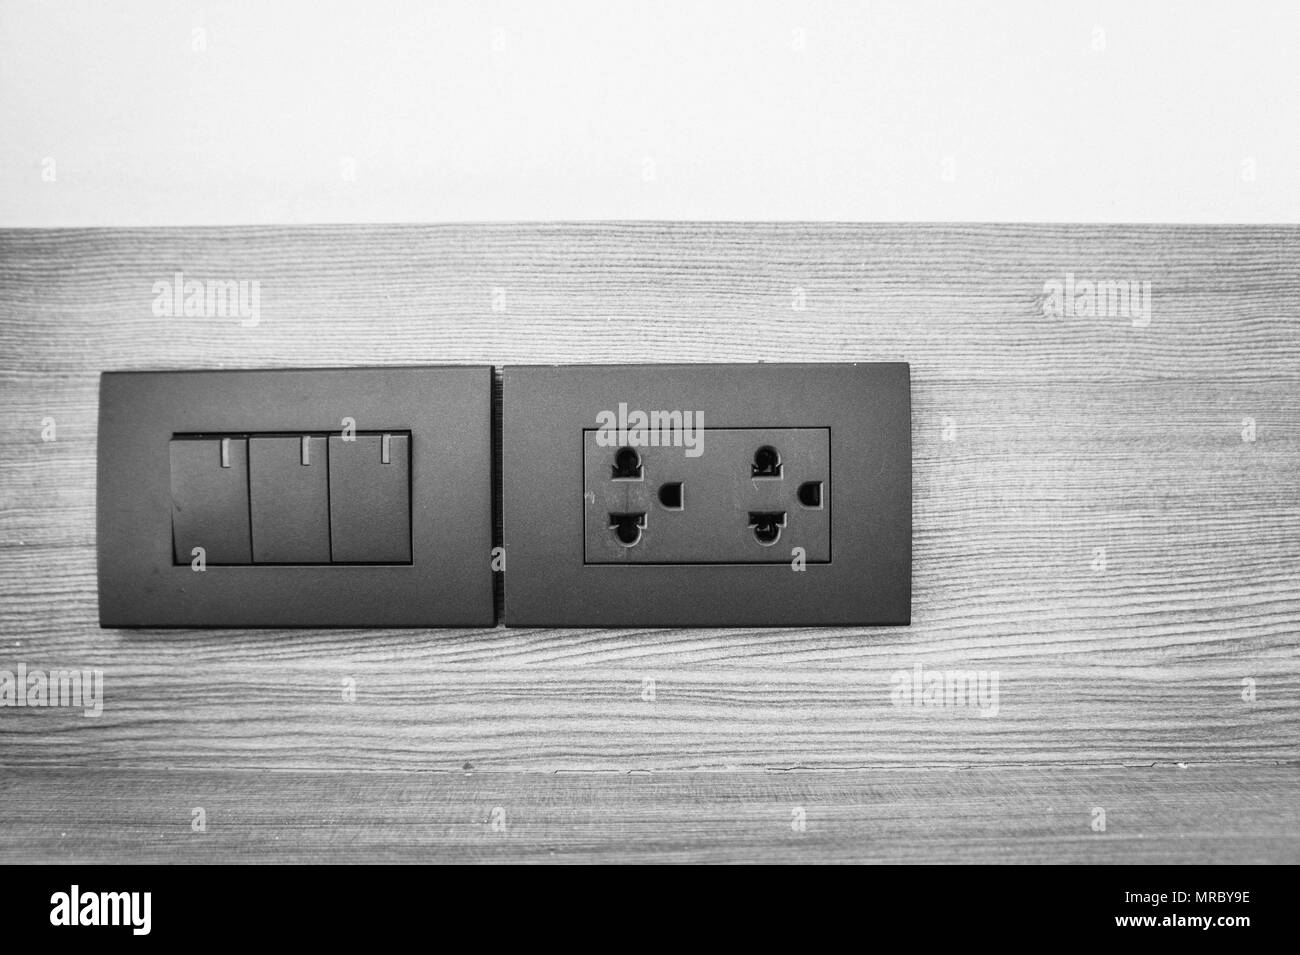 outlet switch on wall in home ,Equipment that connects electrical signals to various home appliances. Stock Photo